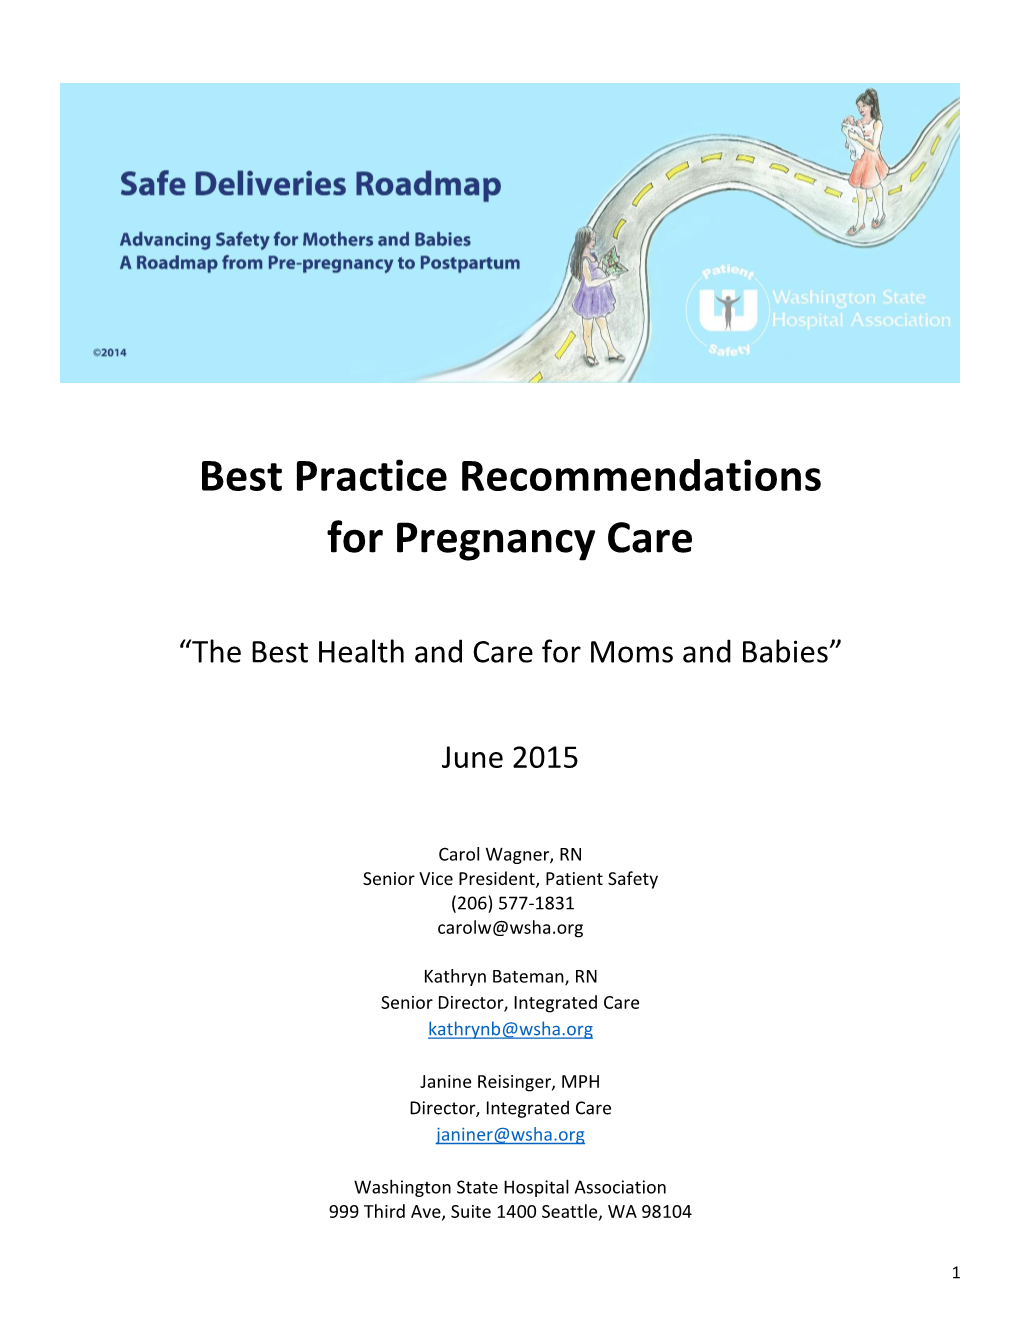 Best Practice Recommendations for Pregnancy Care